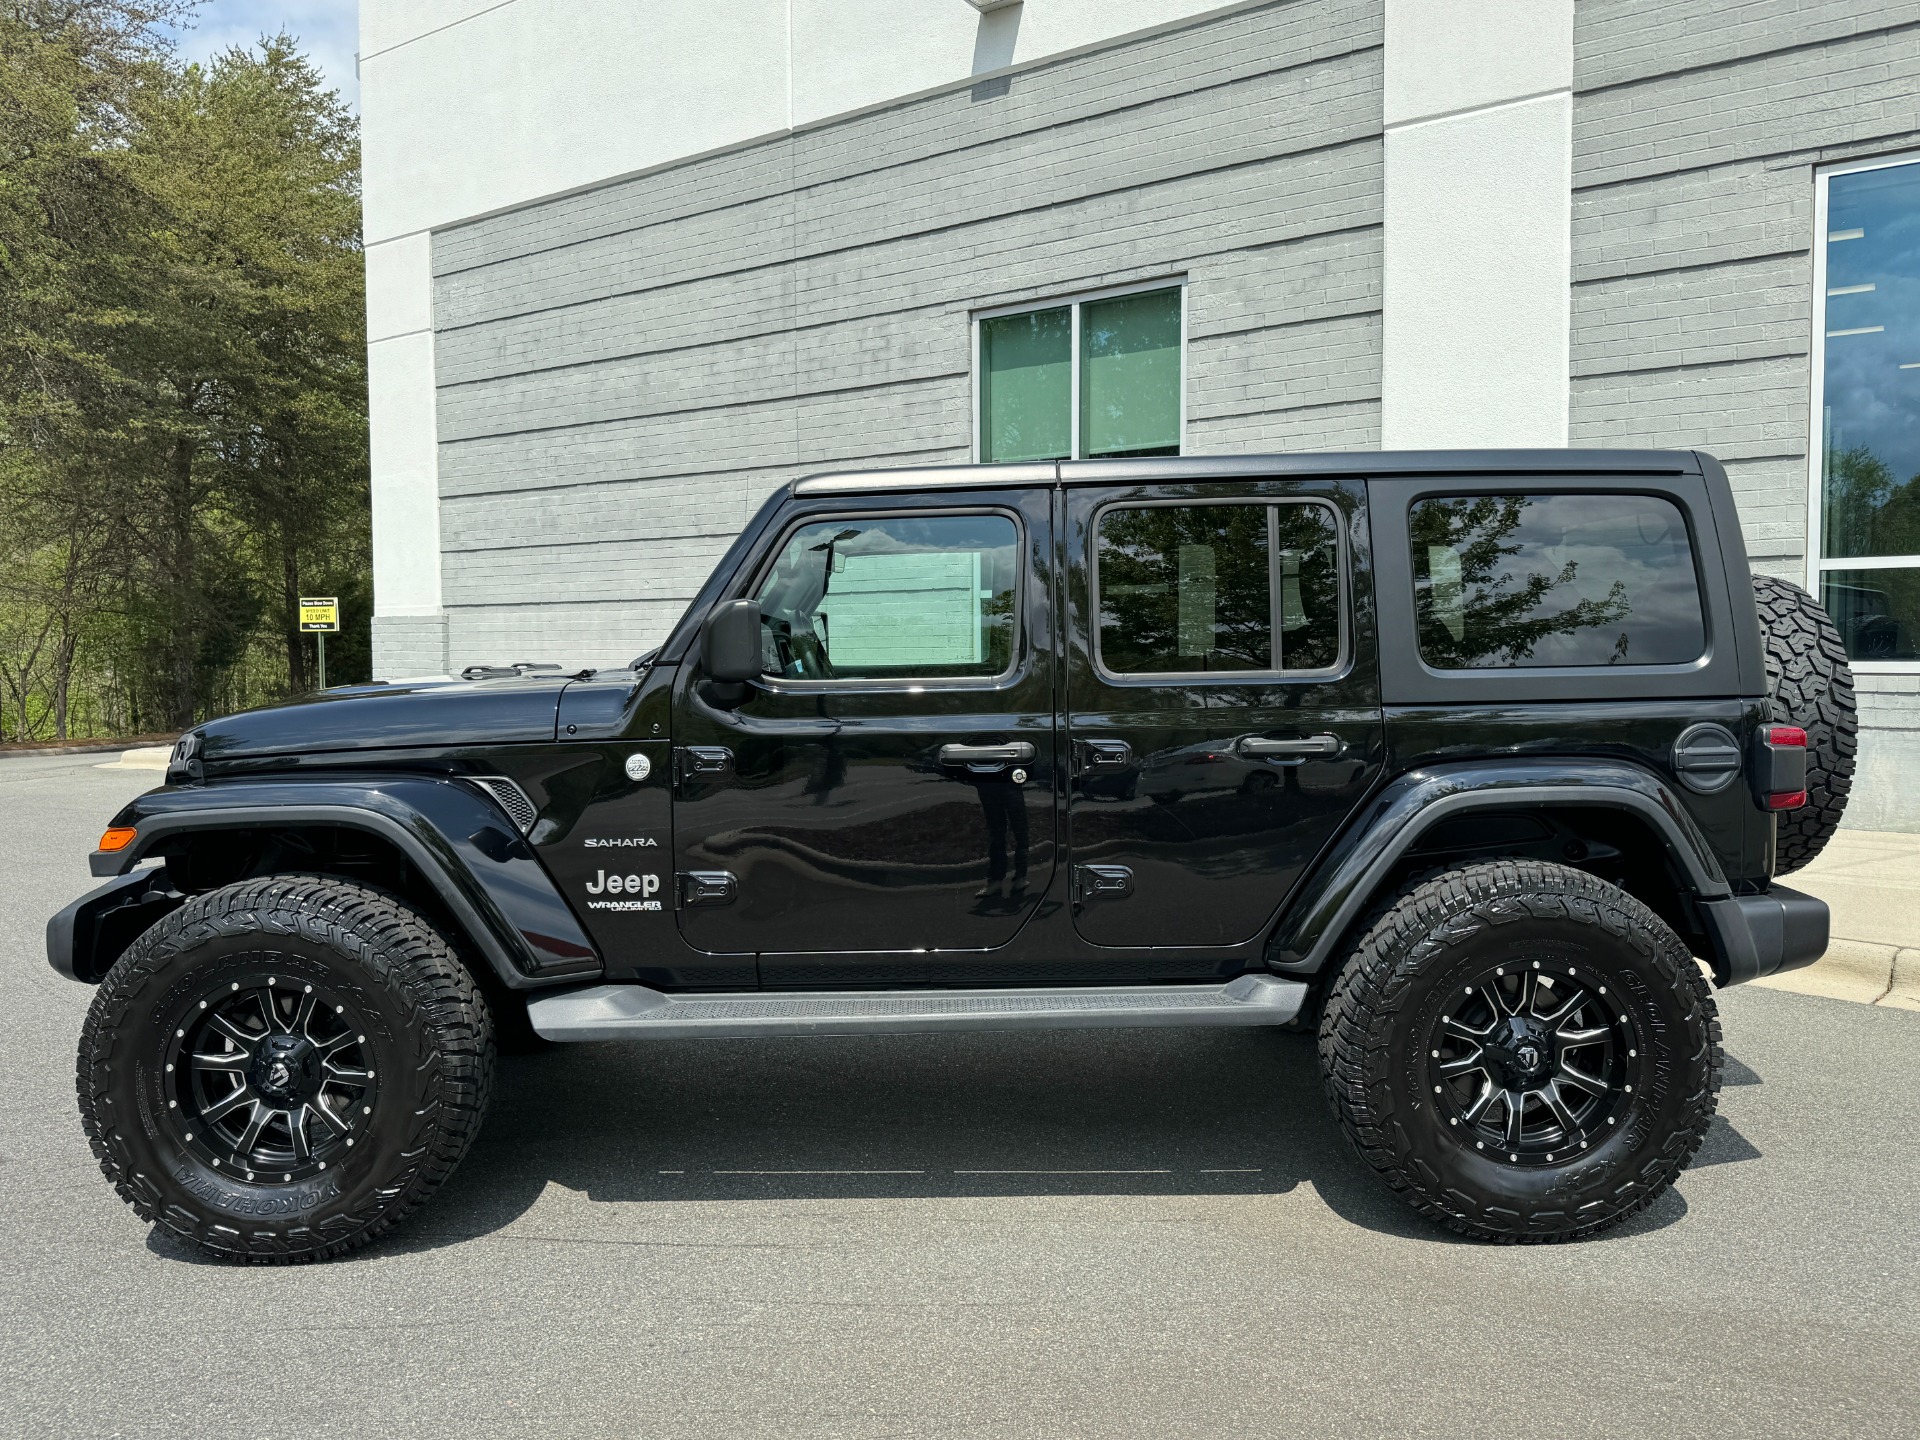 Used 2018 Jeep WRANGLER UNLIMITED SAHARA 4X4 / MANUAL / NAV / ALPINE / FREEDOM TOP / REARVIEW for sale Sold at Formula Imports in Charlotte NC 28227 6